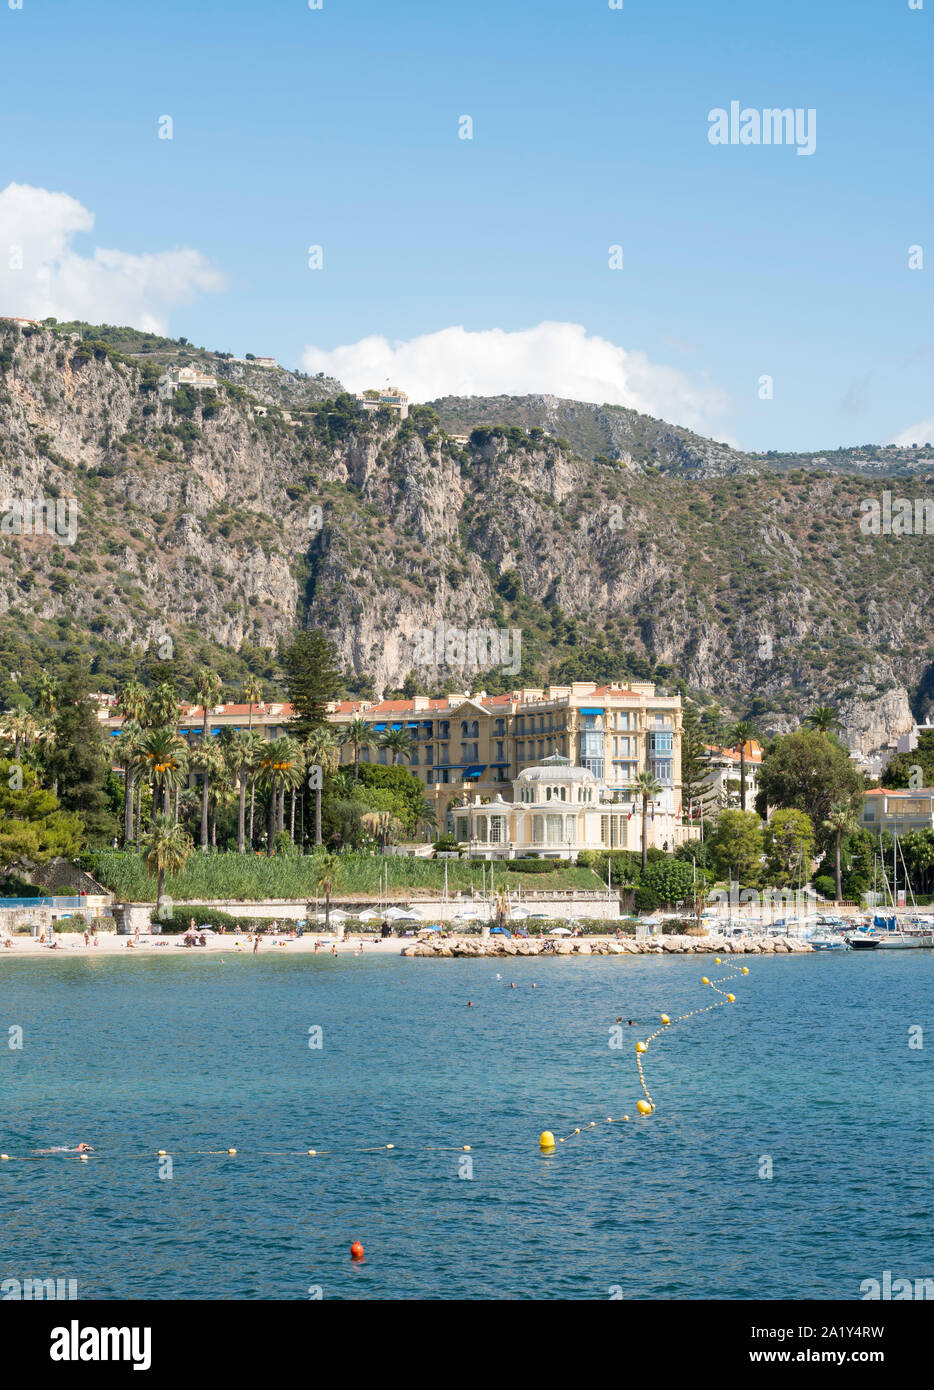 The Hotel Bristol near the seafront at Beaulieu Sur Mer, France, Europe Stock Photo